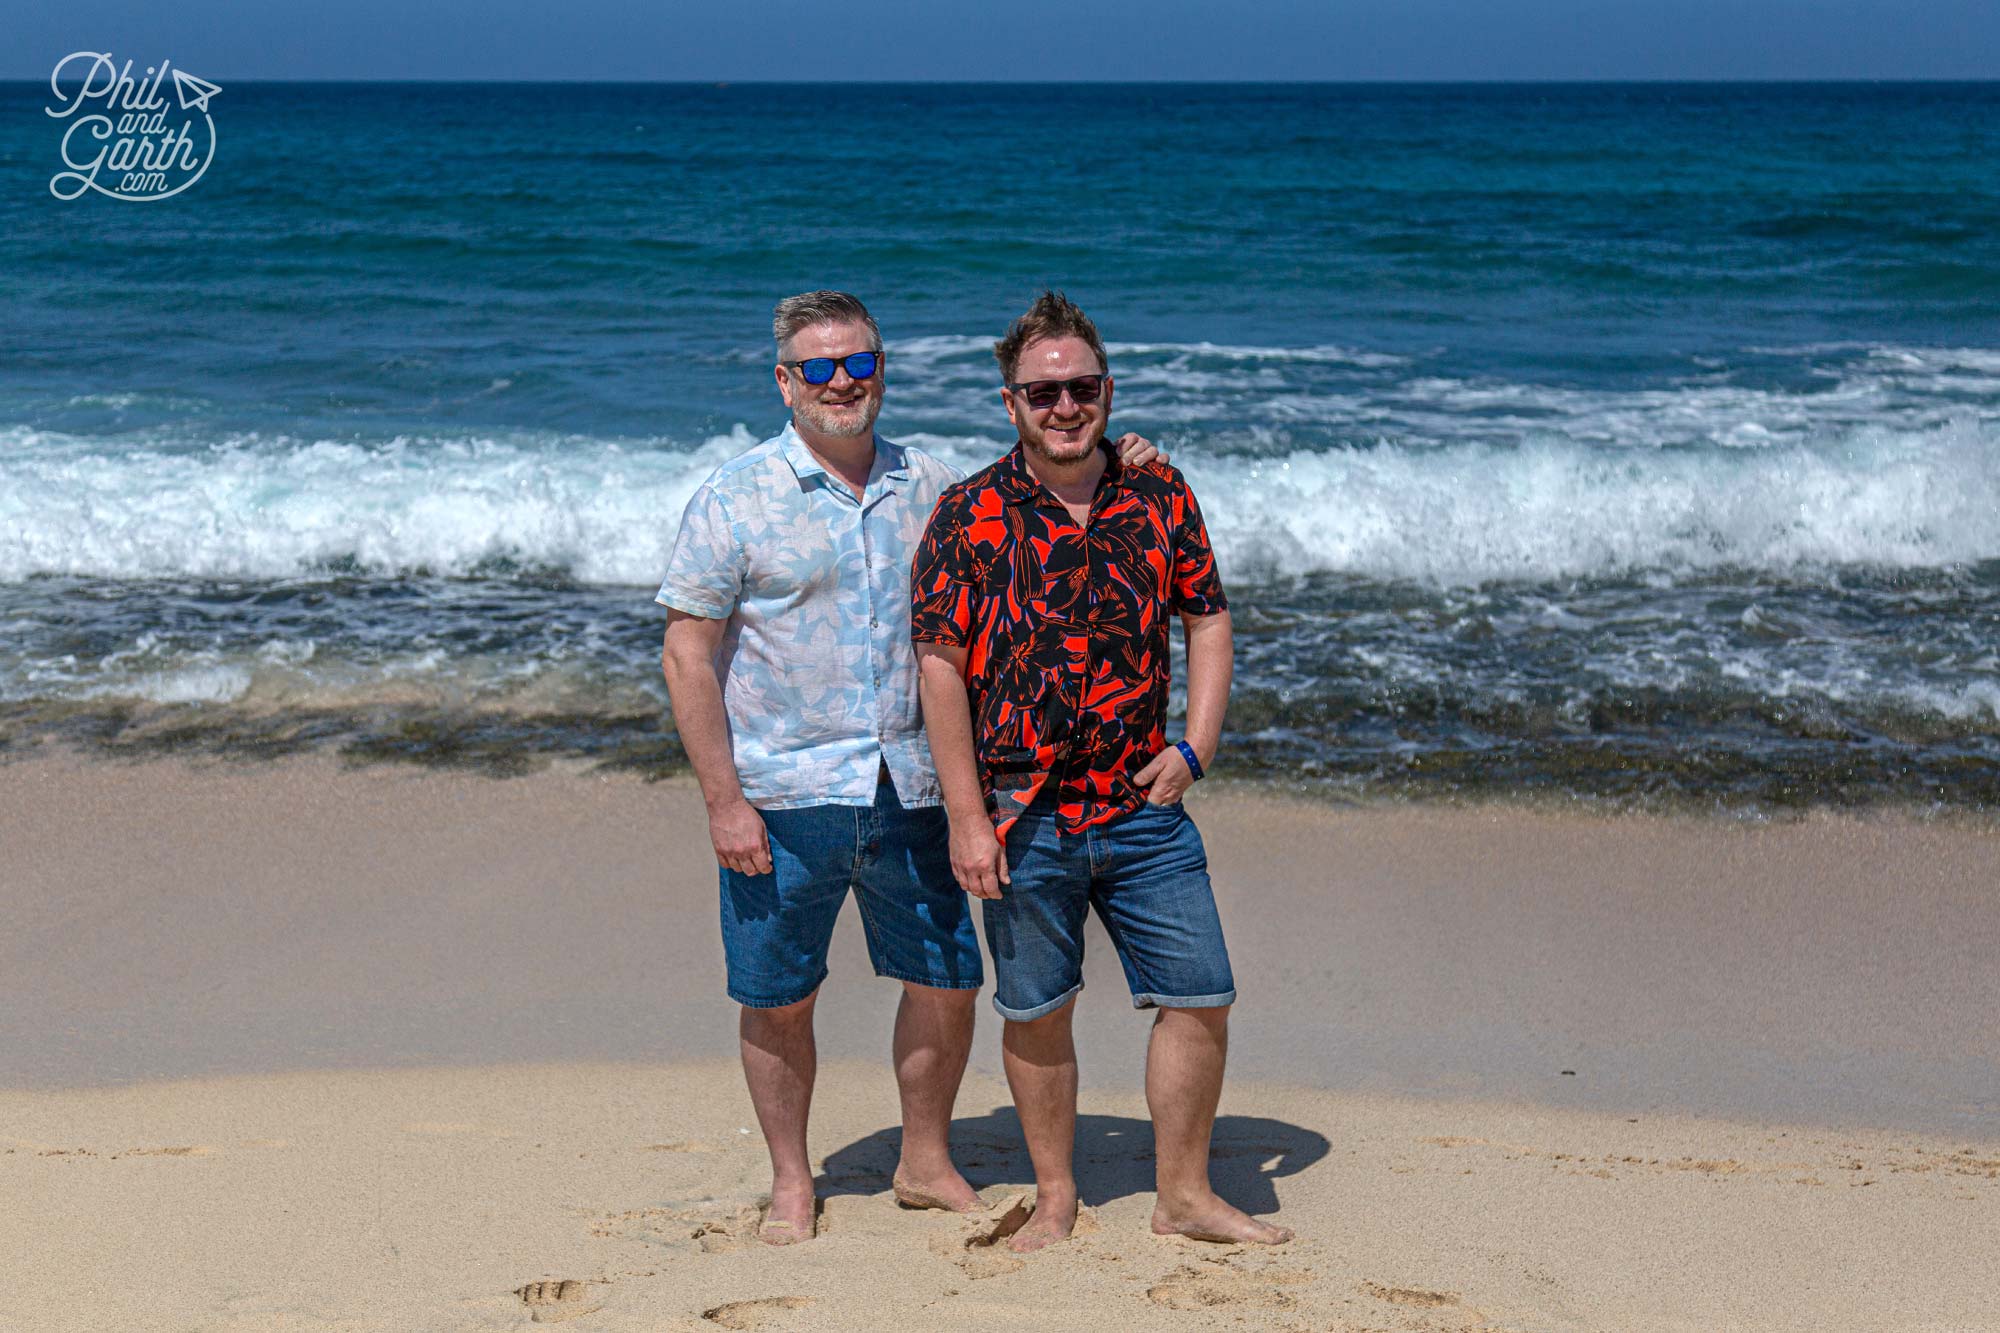 Phil and Garth's Top 5 Sal, Cape Verde Tips